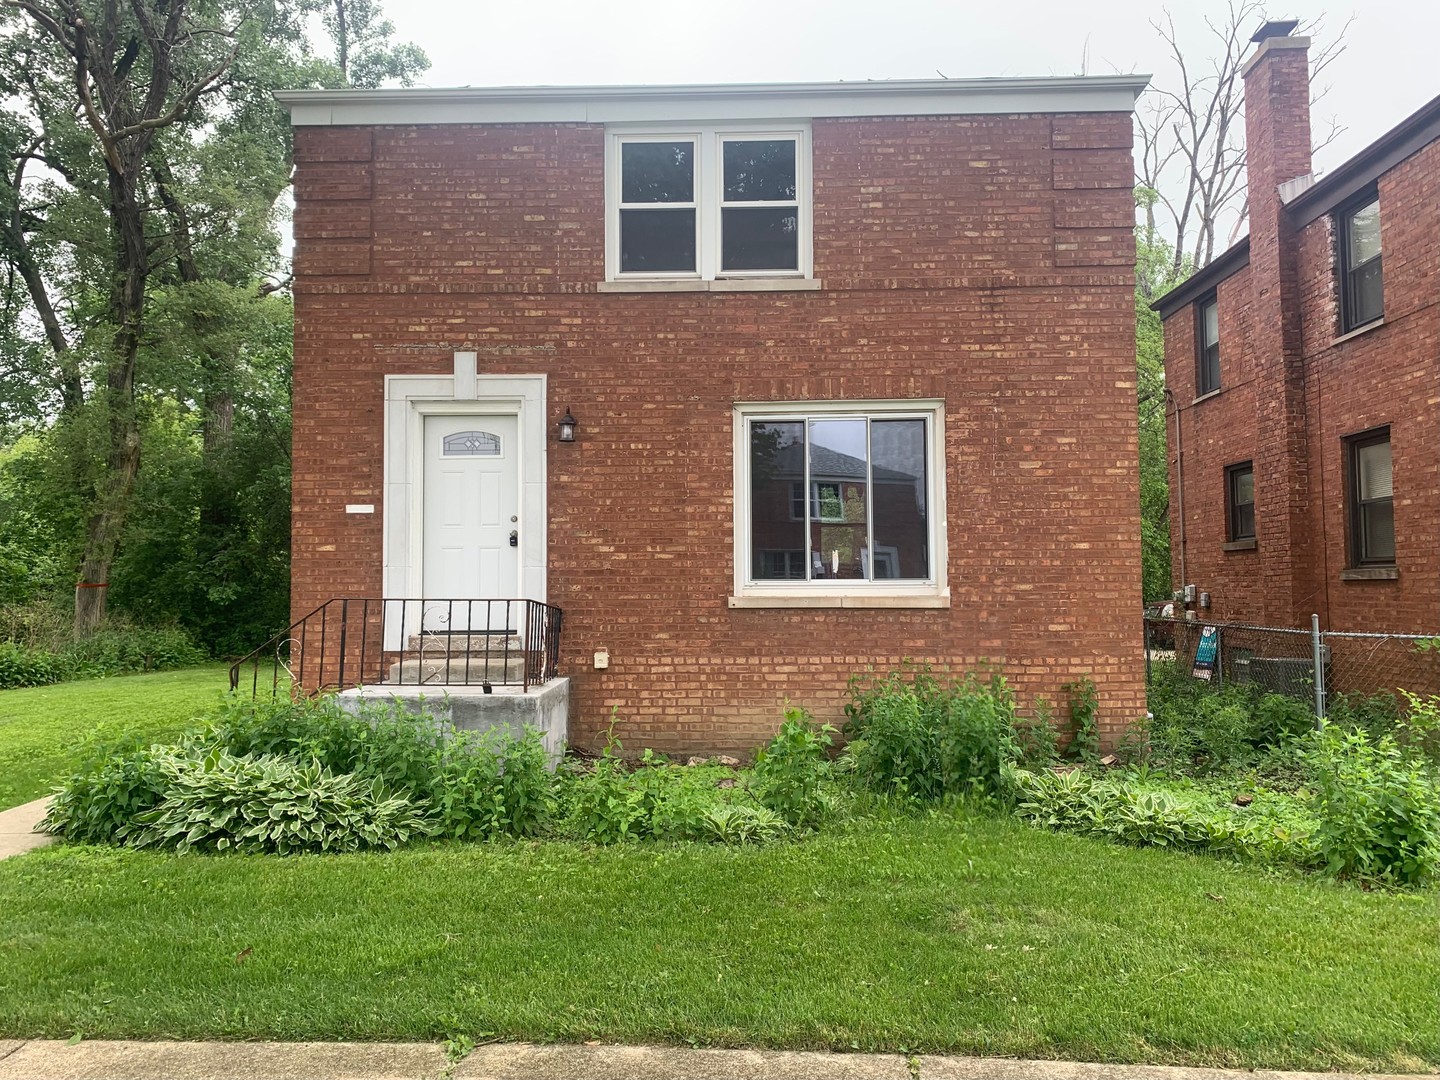 a brick building with a yard in front of it